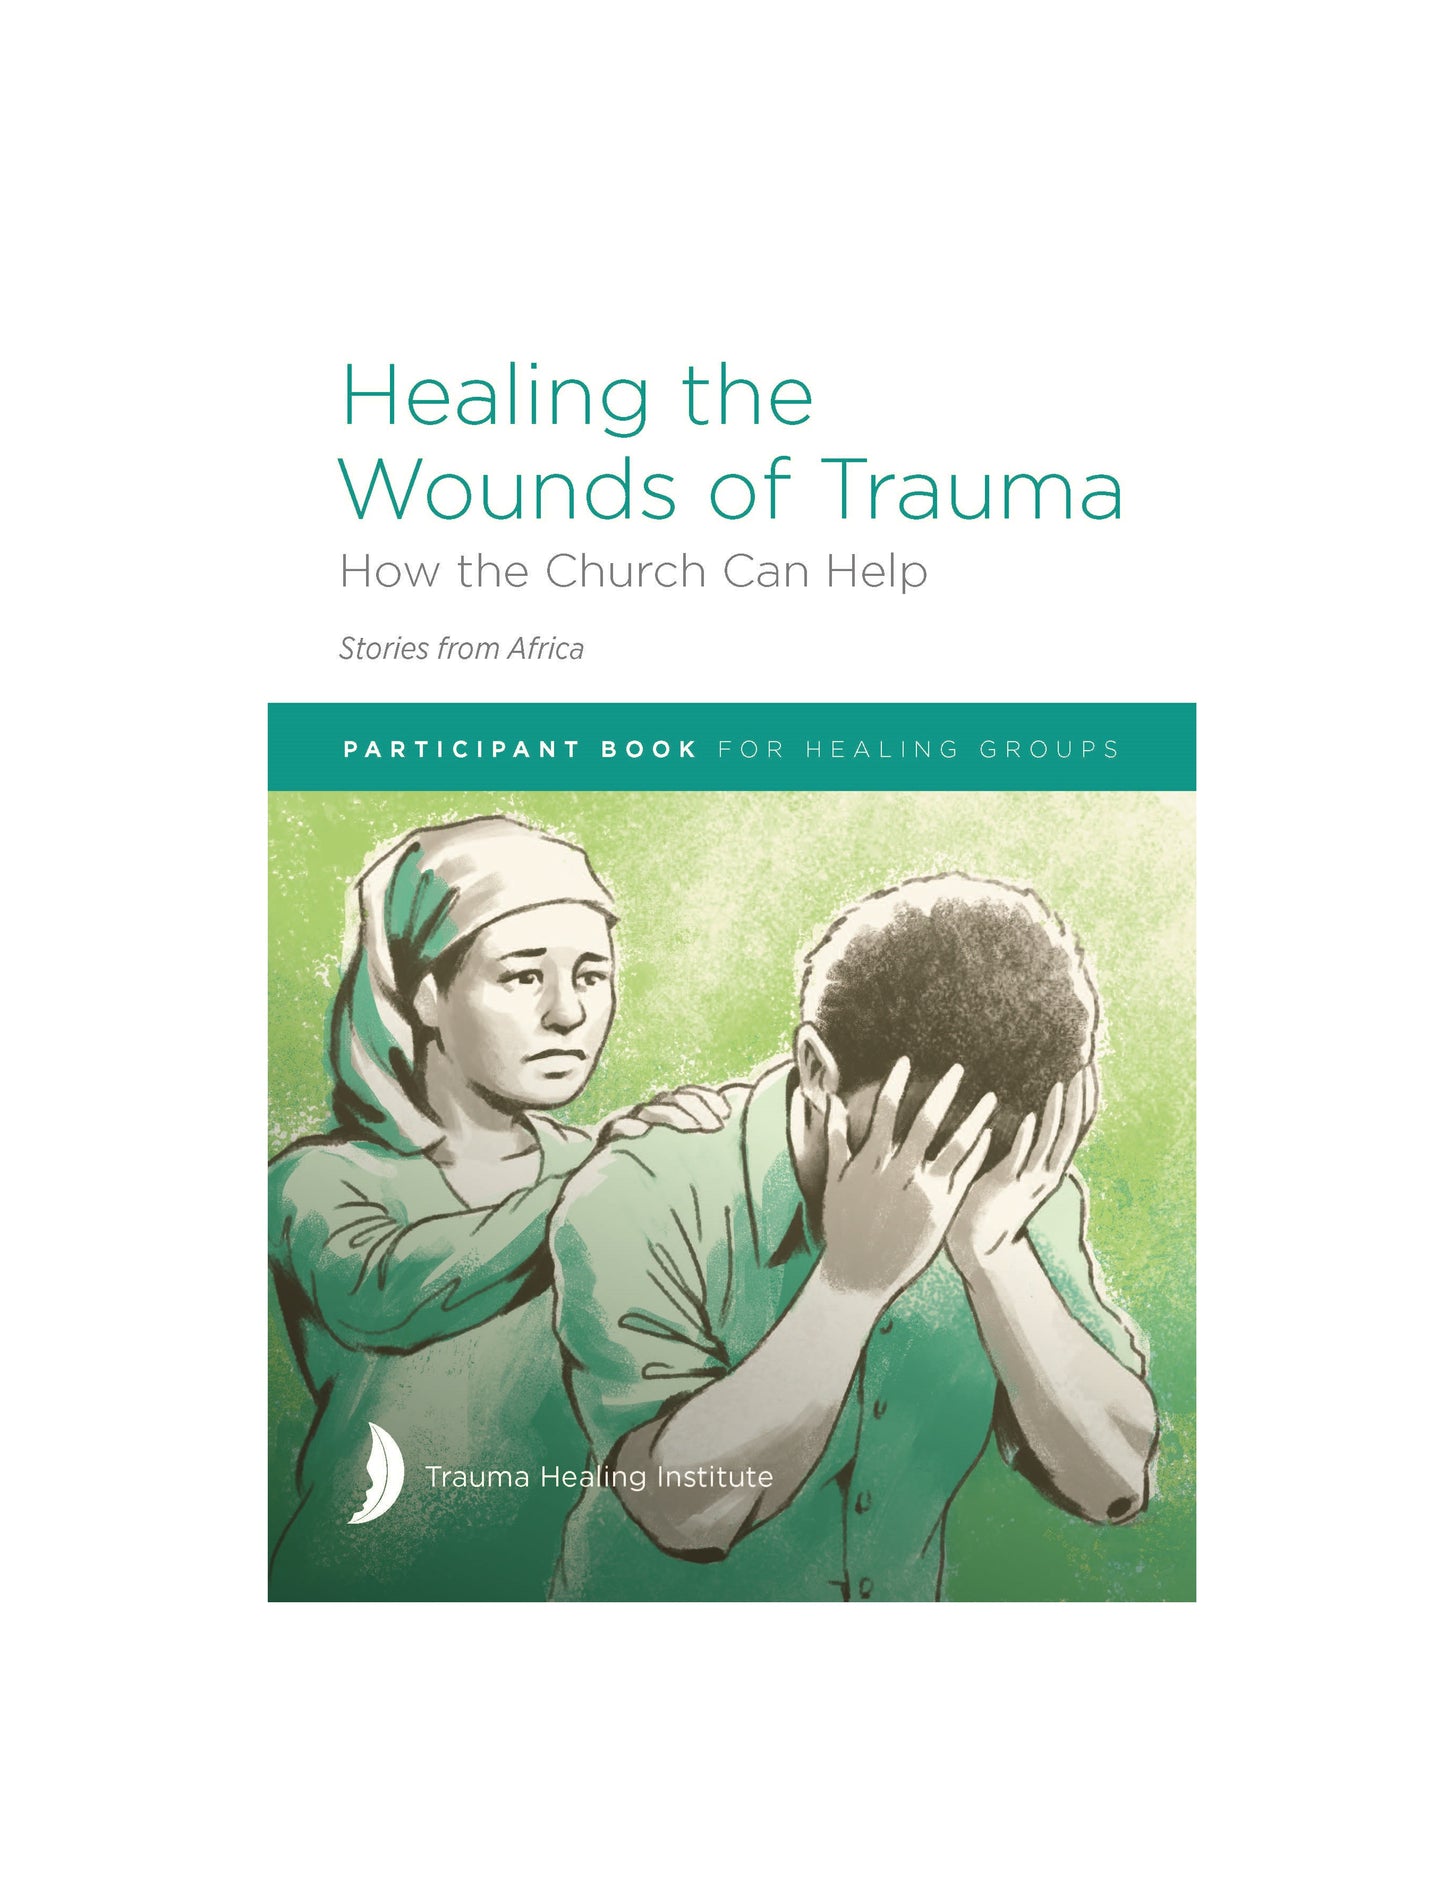 Healing the Wounds of Trauma: How the Church Can Help (Stories from Africa) 2021 edition - ePub version